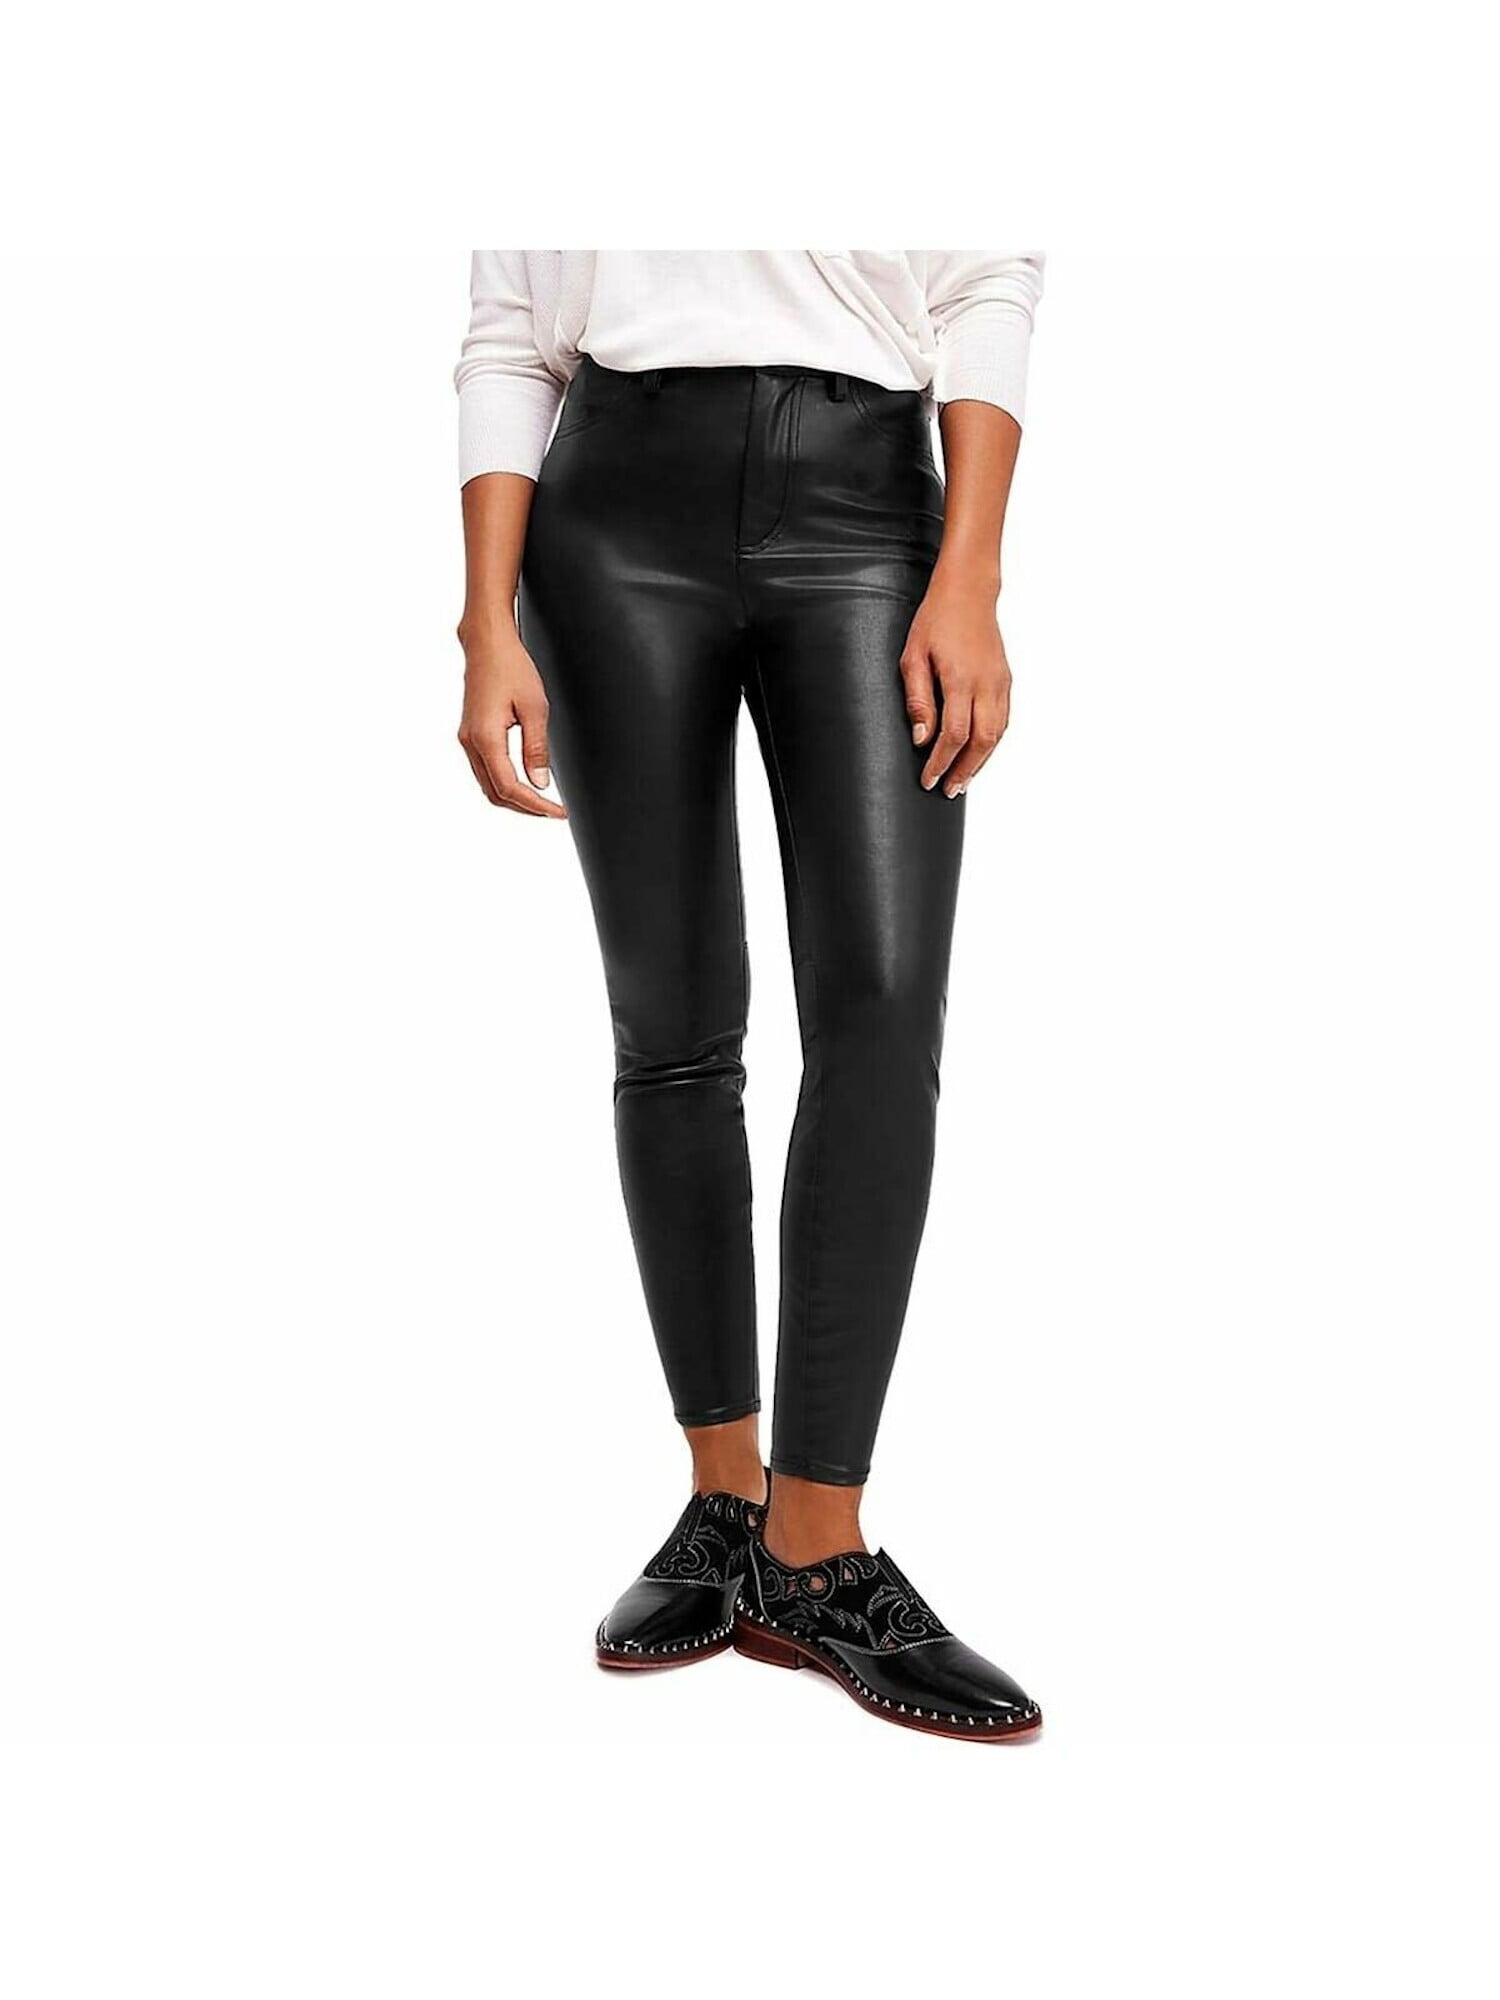 FREE PEOPLE Womens Black Faux Leather High Rise Skinny Pants Size 26 ...